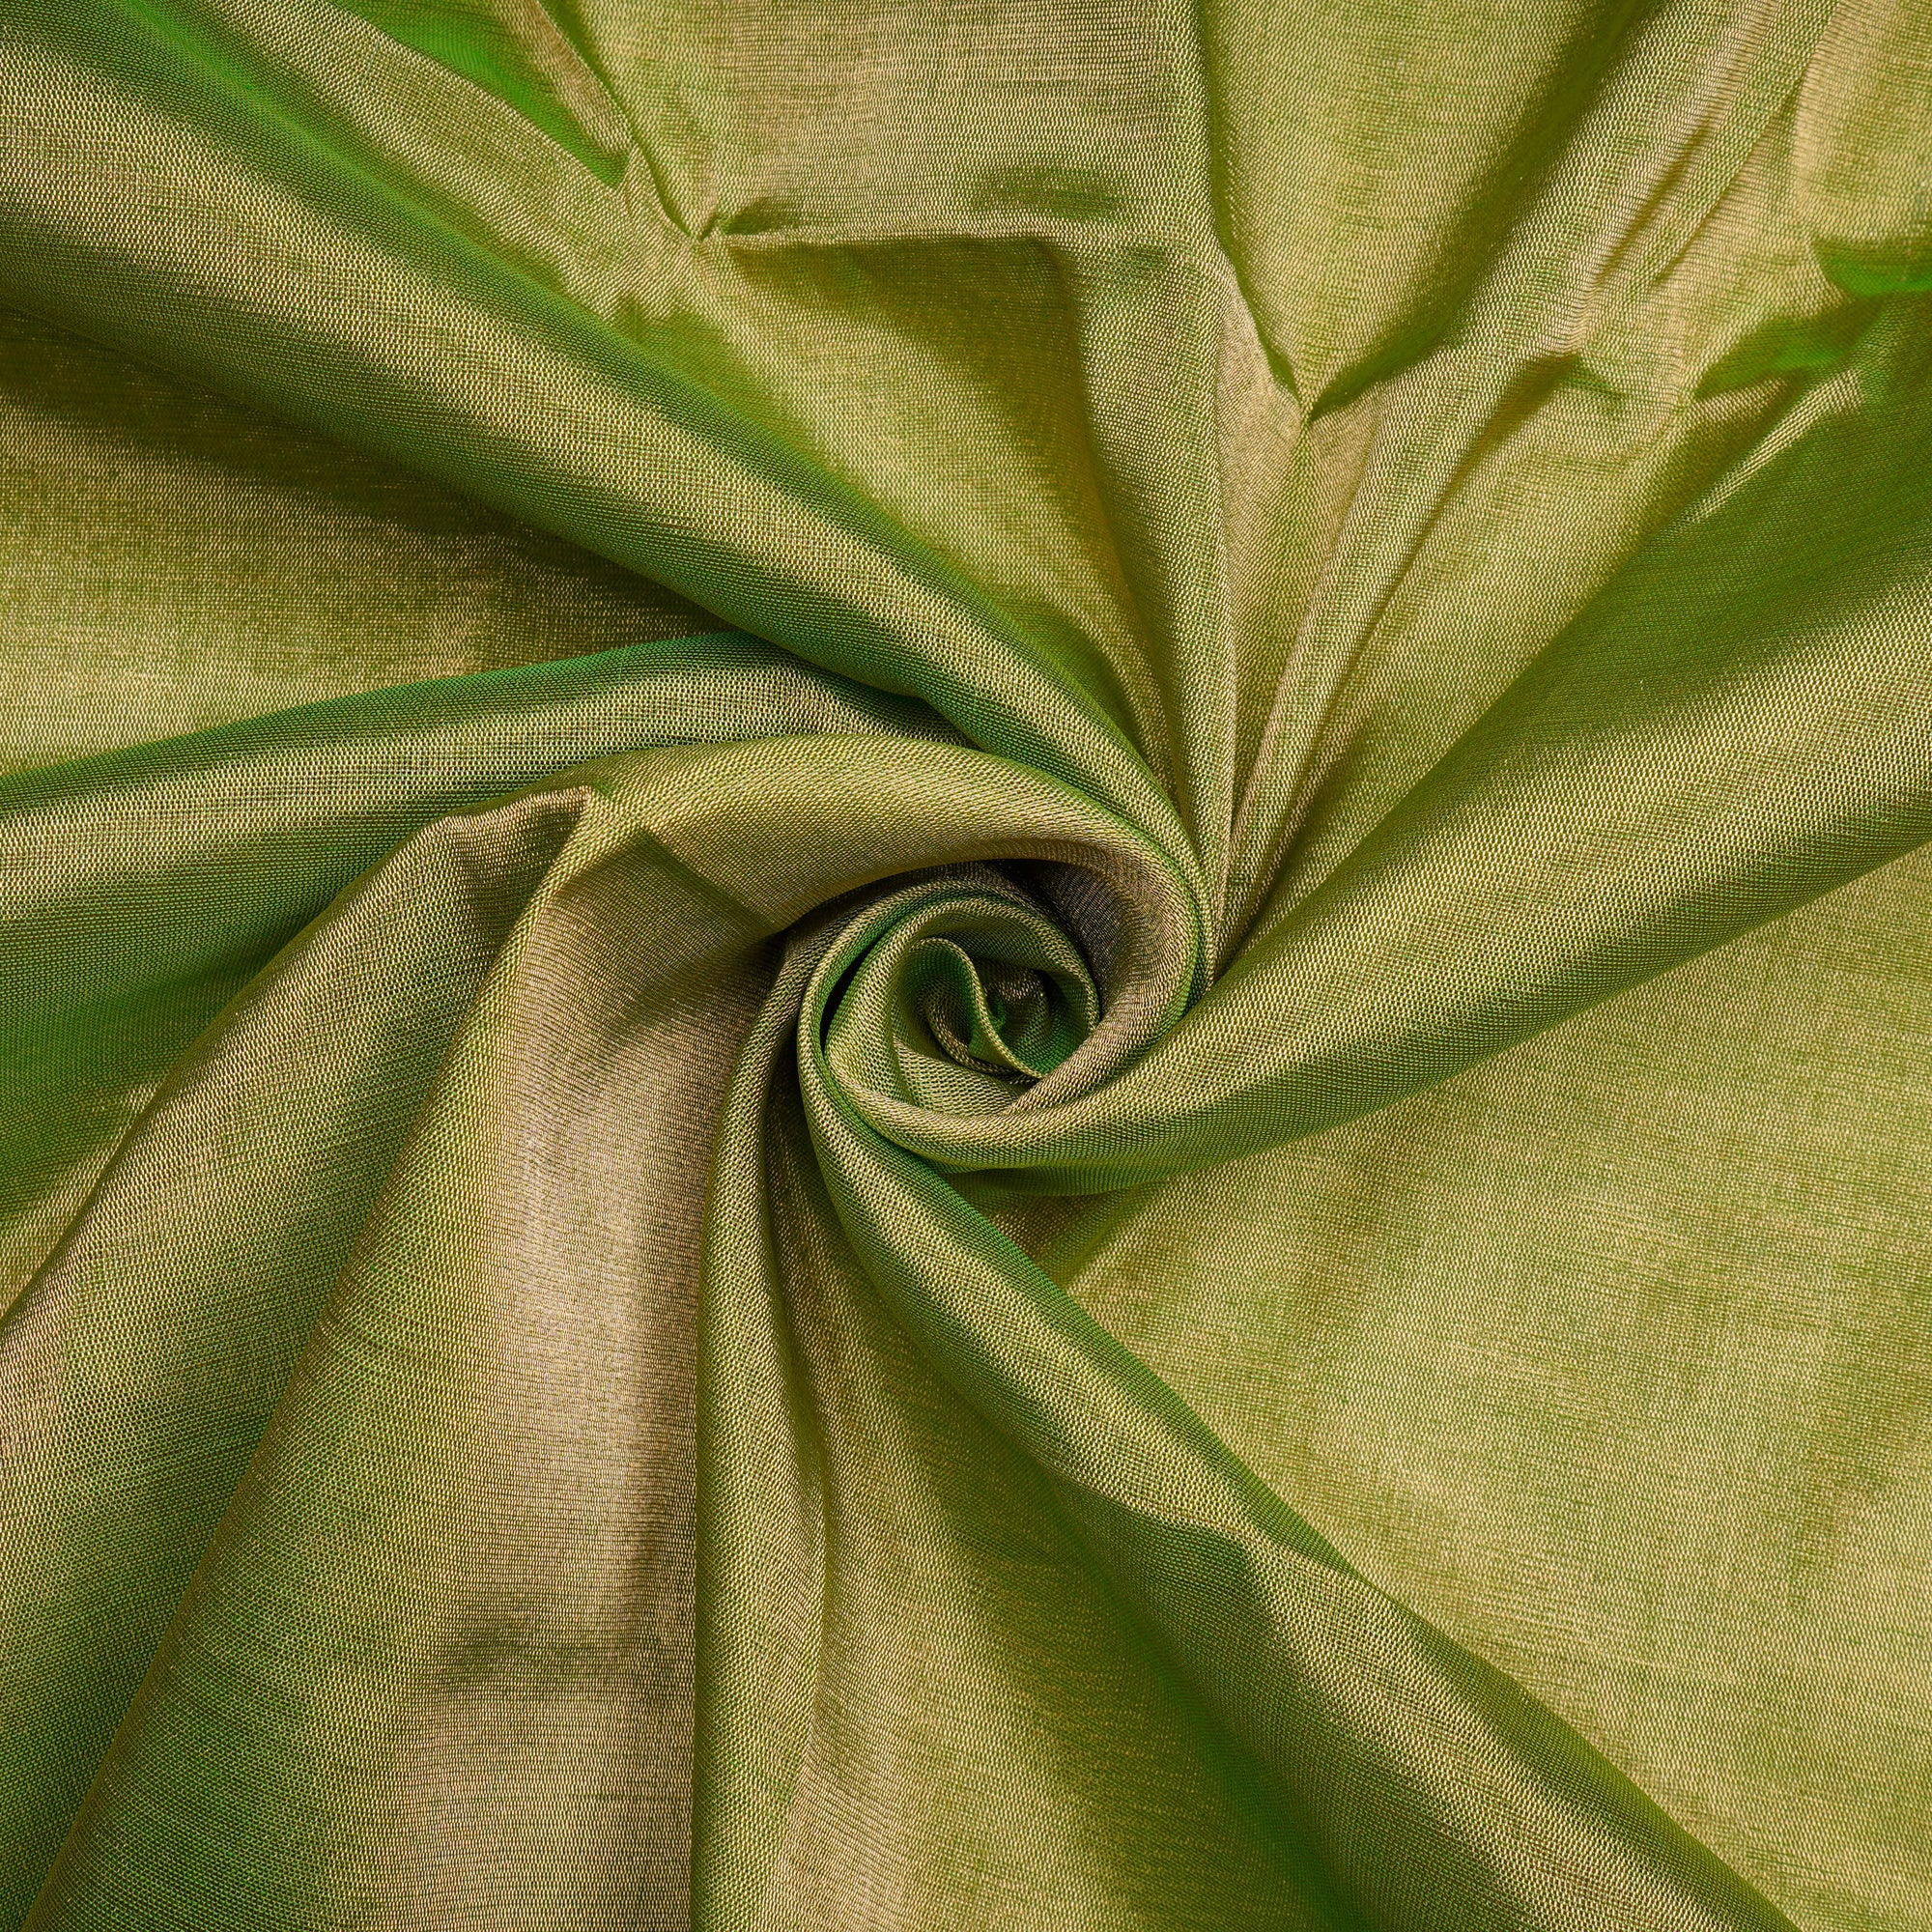 Piquant Green-Golden Handwoven Heavy Pure Tissue Fabric